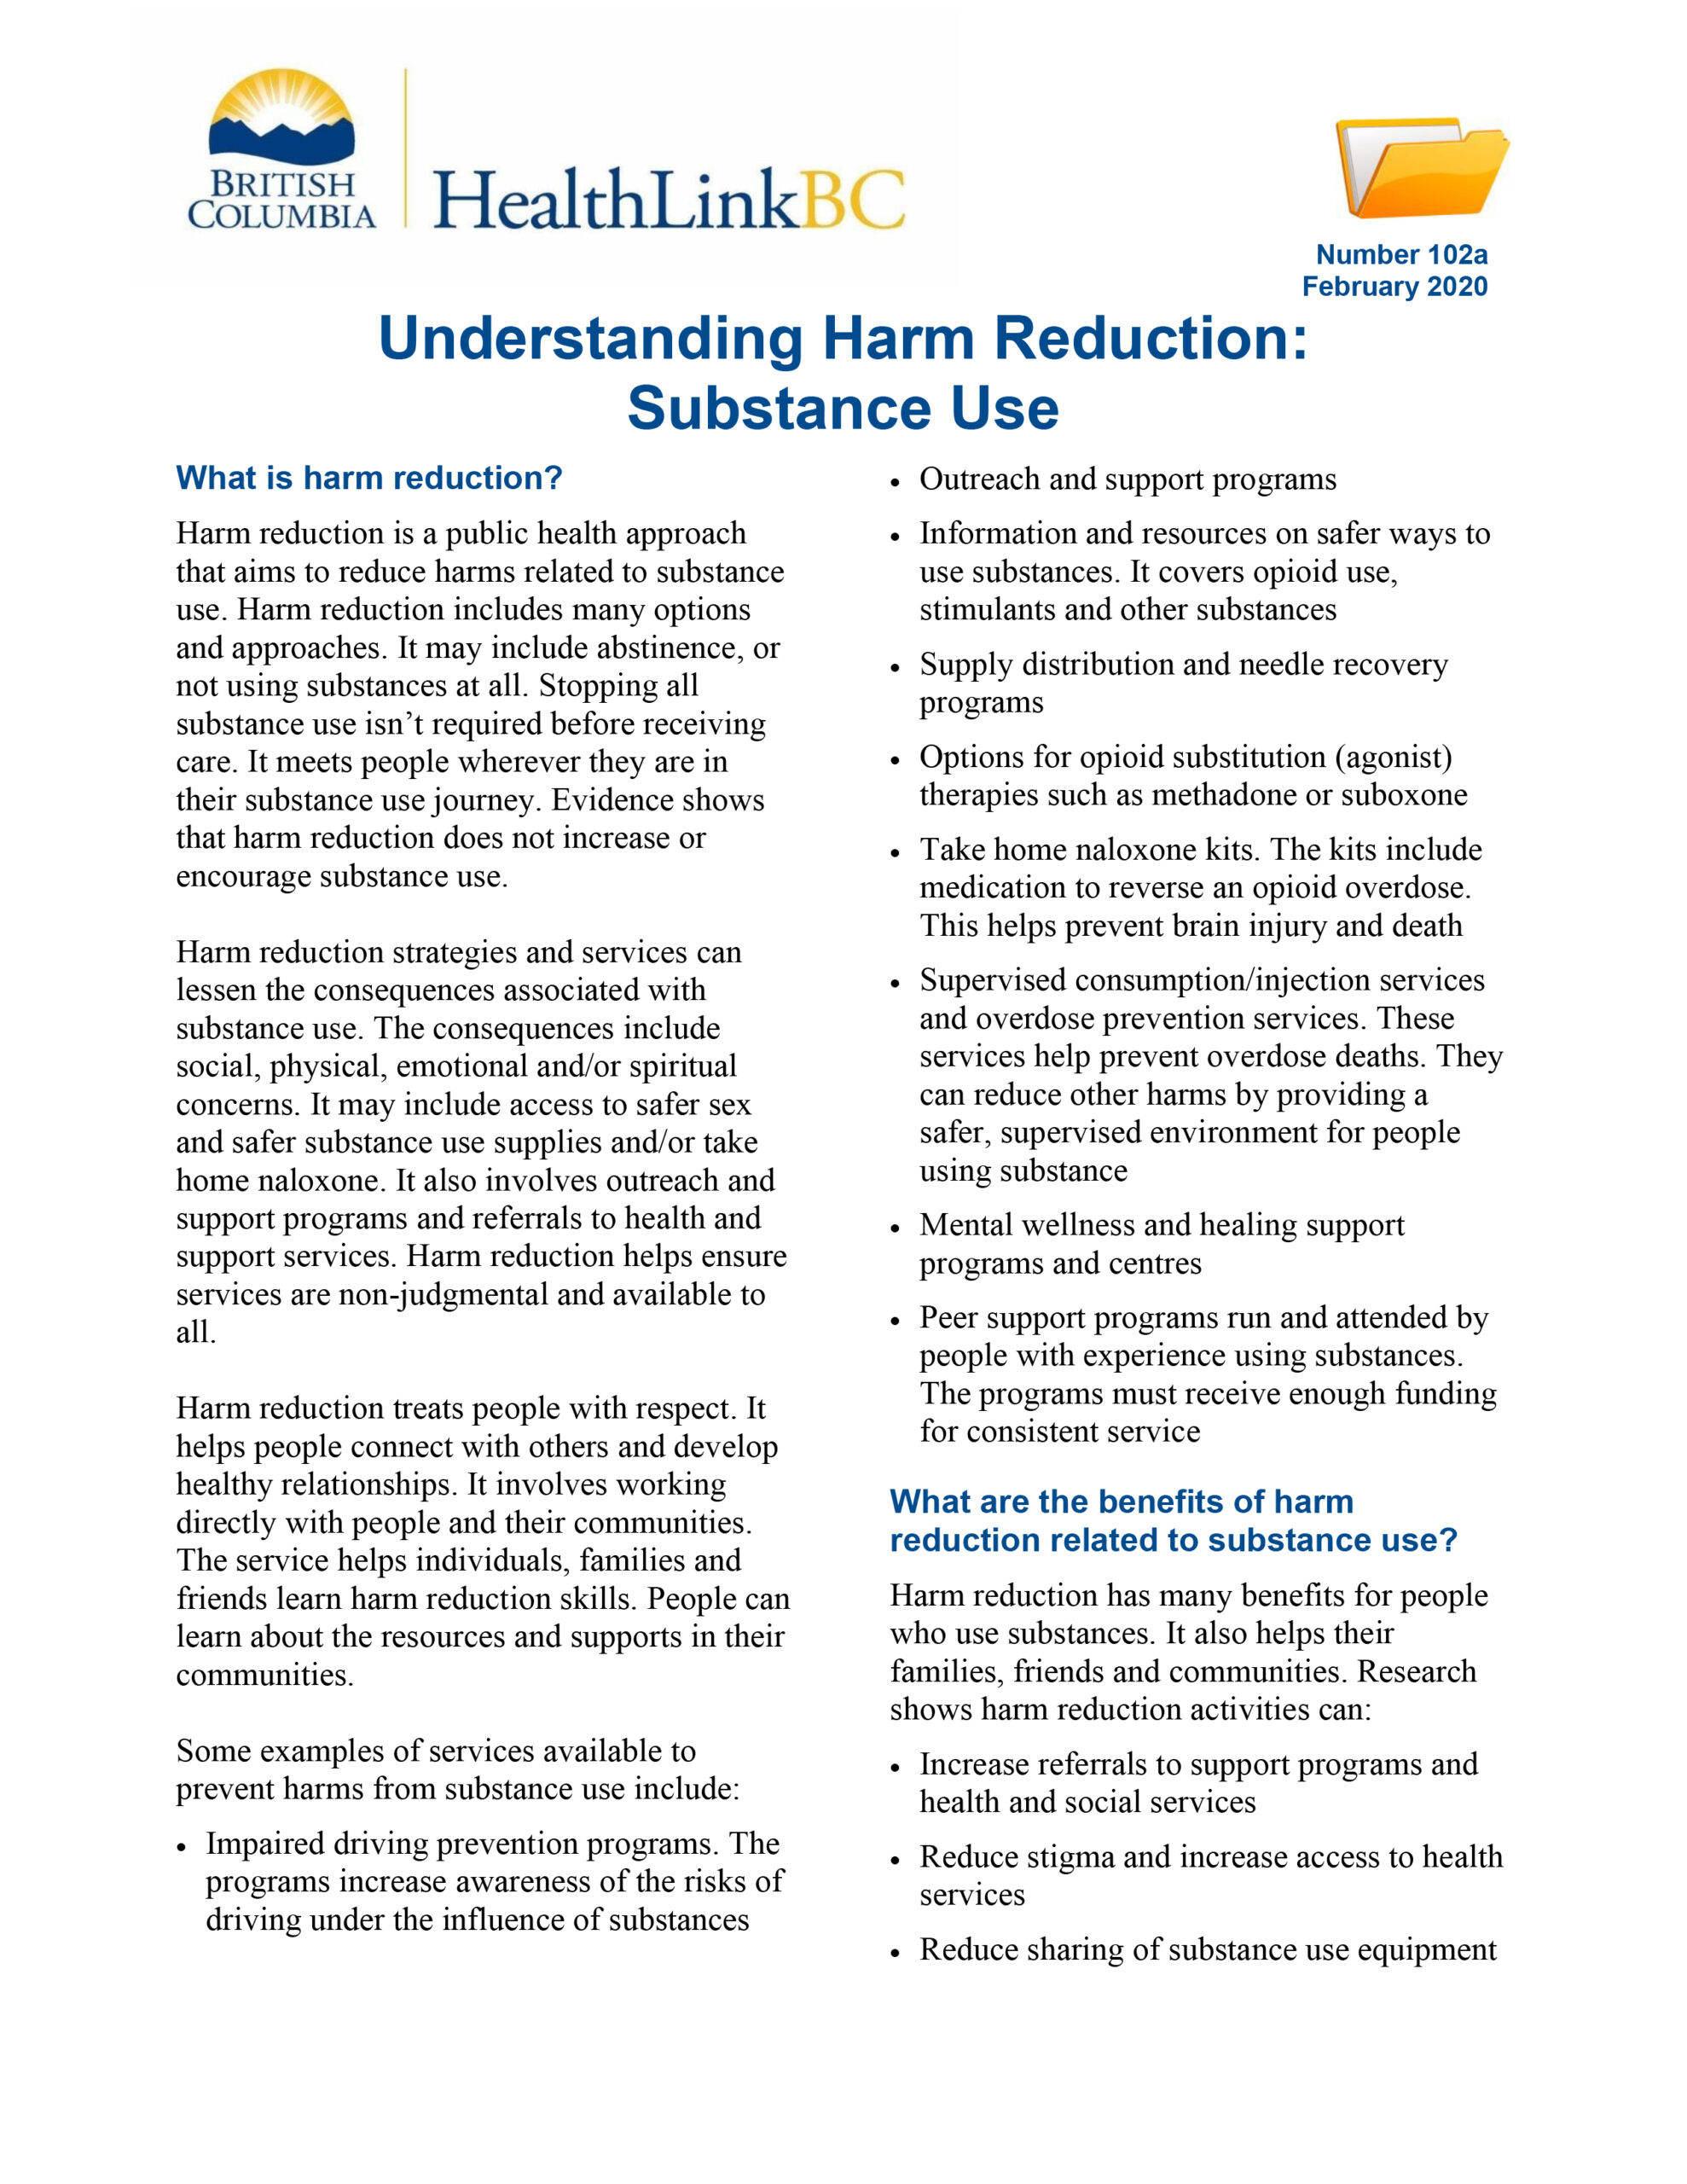 Understanding Harm Reduction: Substance Use